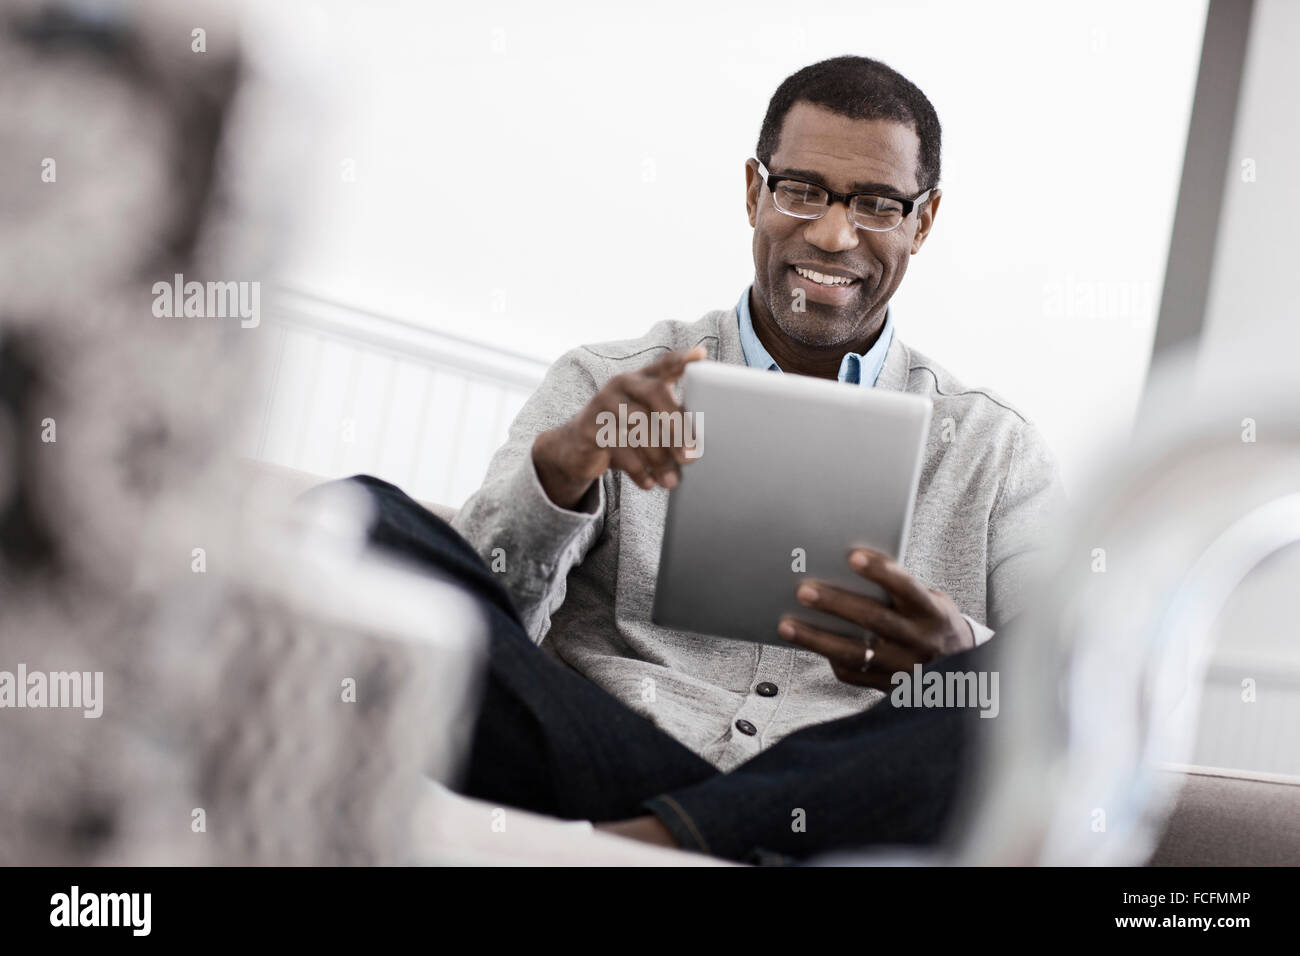 A man sitting on a sofa, using a digital tablet. Stock Photo